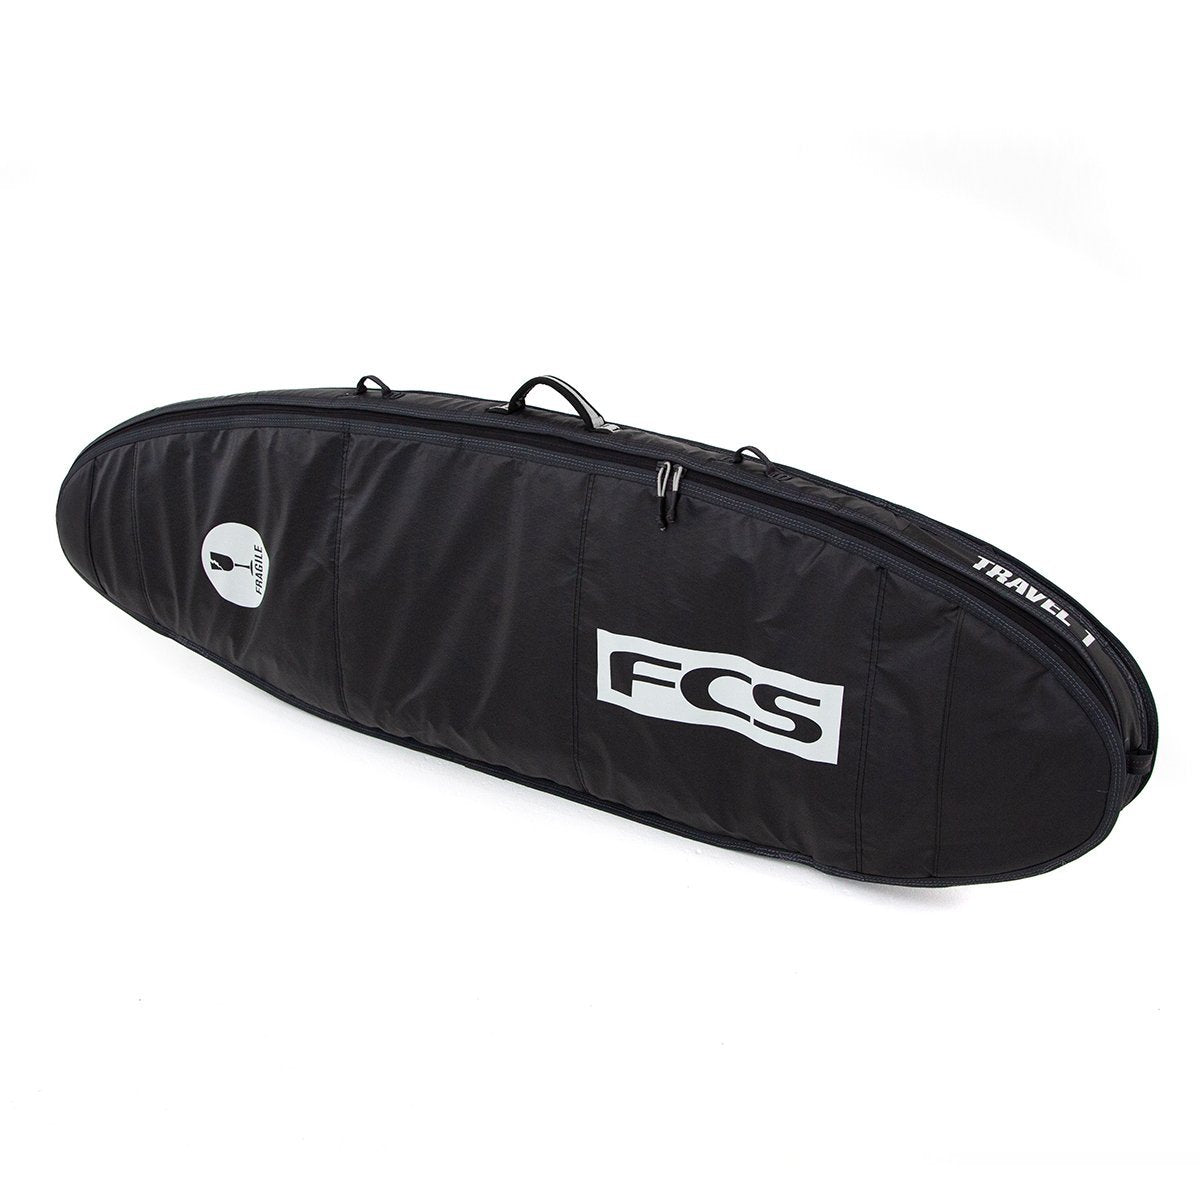 6'3" FCS Travel 1 All Purpose Surfboard Cover